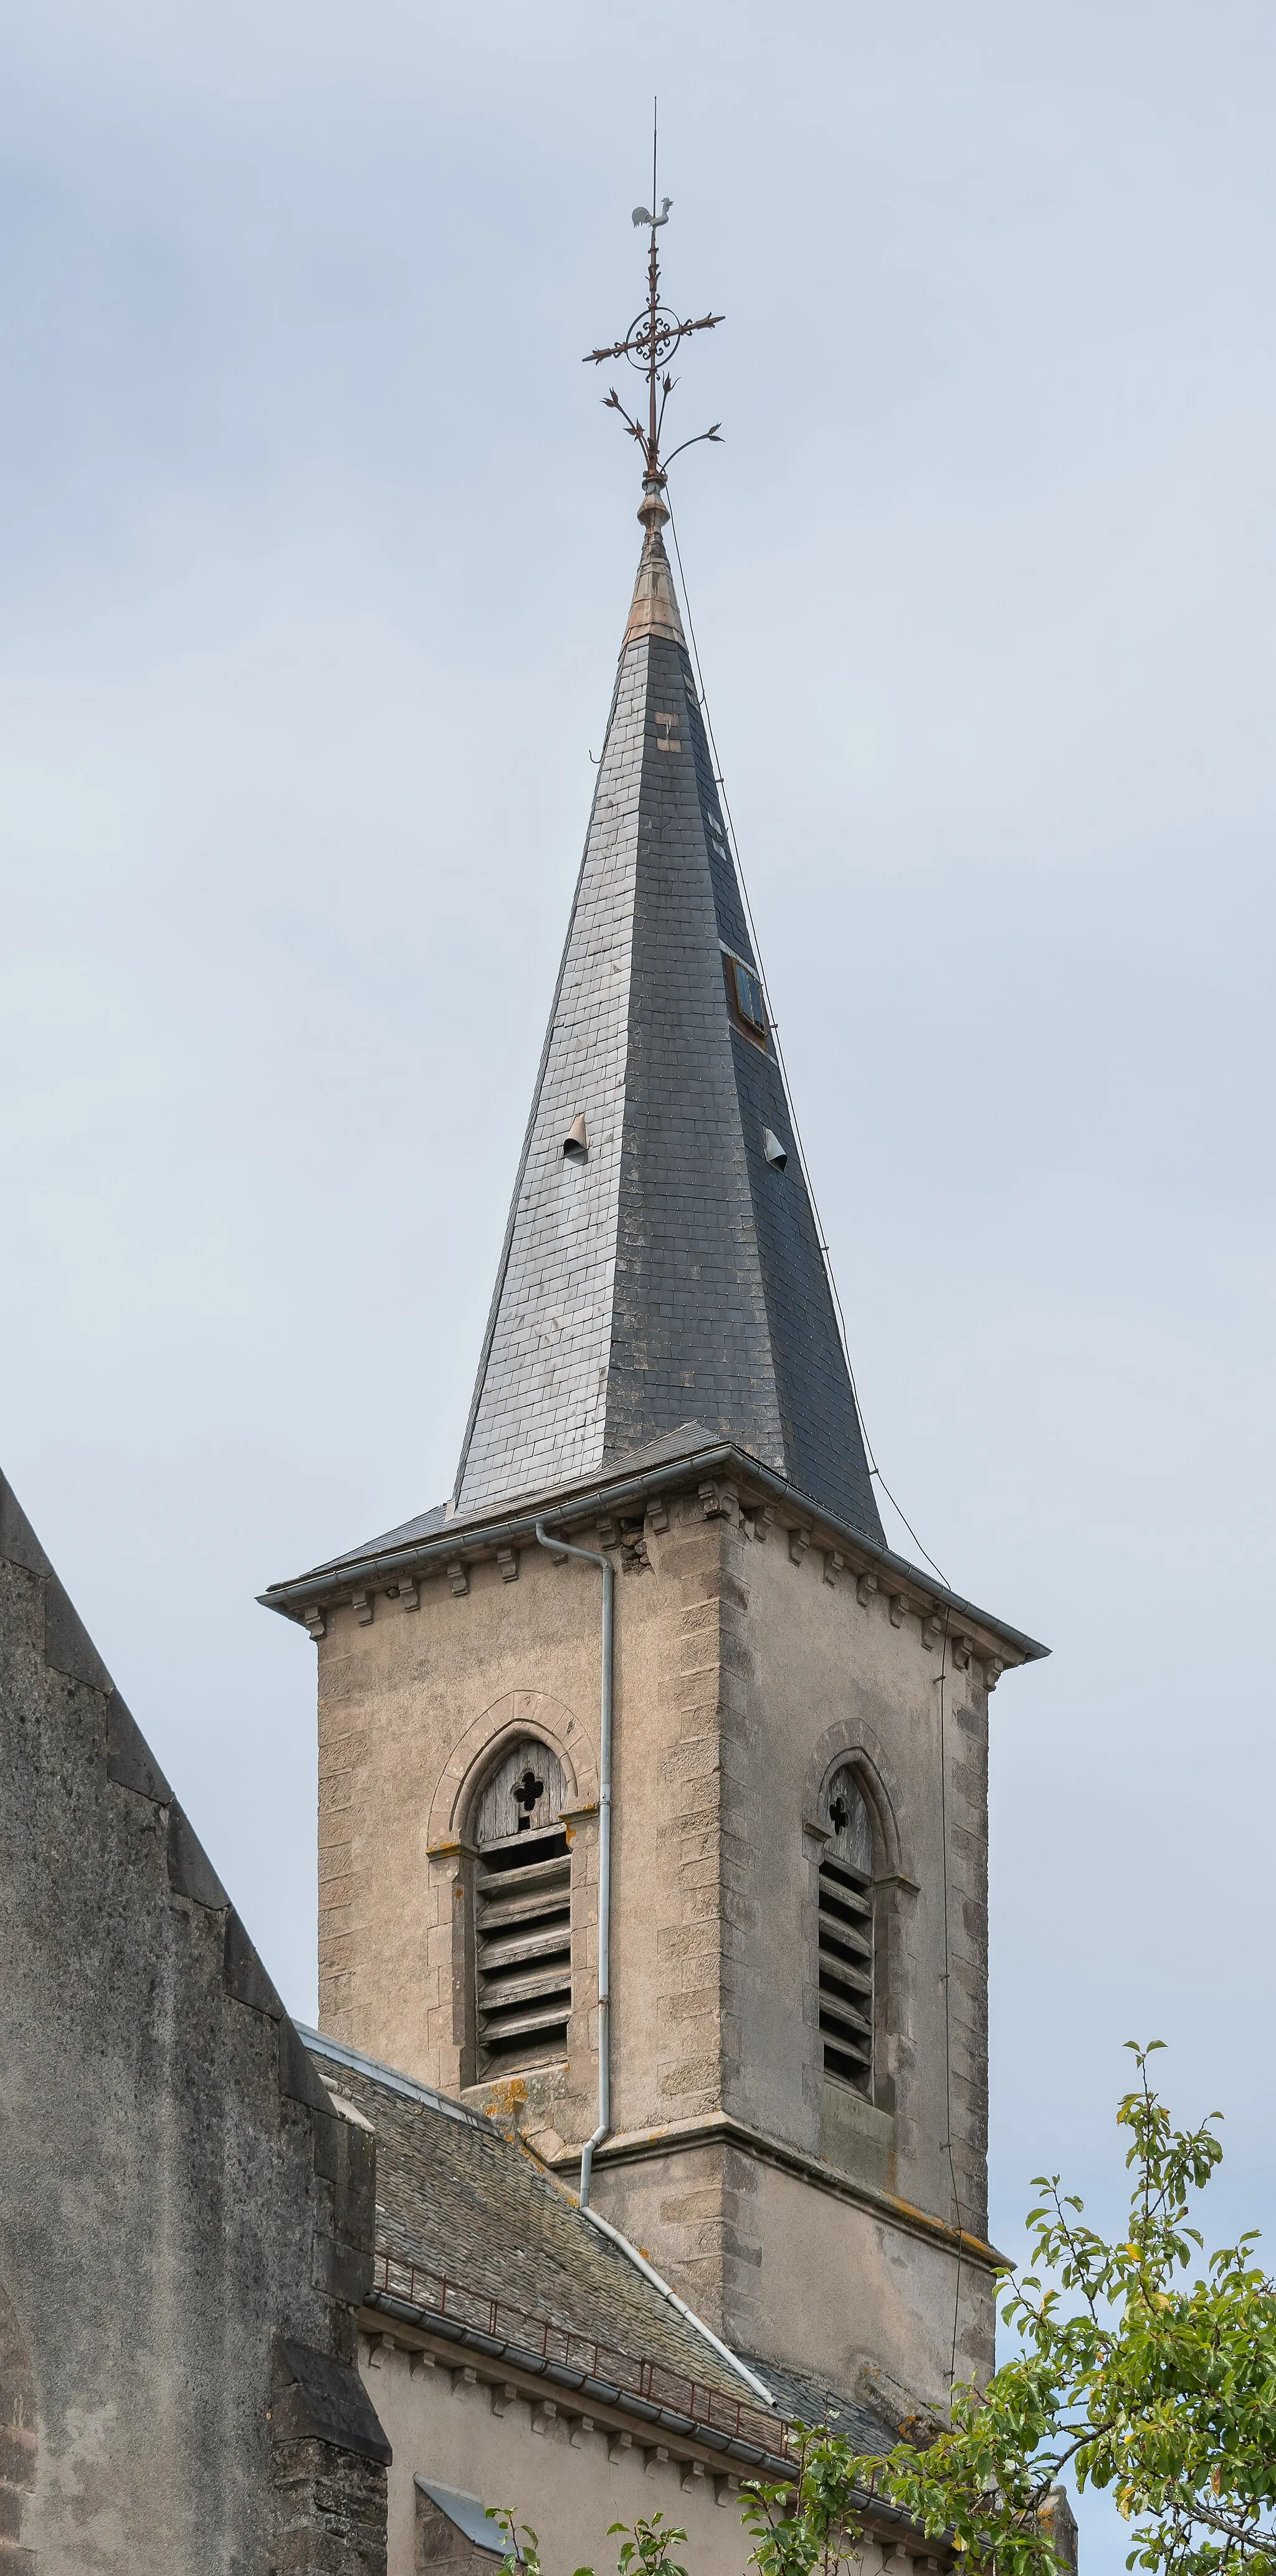 Photo showing: Bell tower of the Saint Martial church in Trémouilles, Aveyron, France